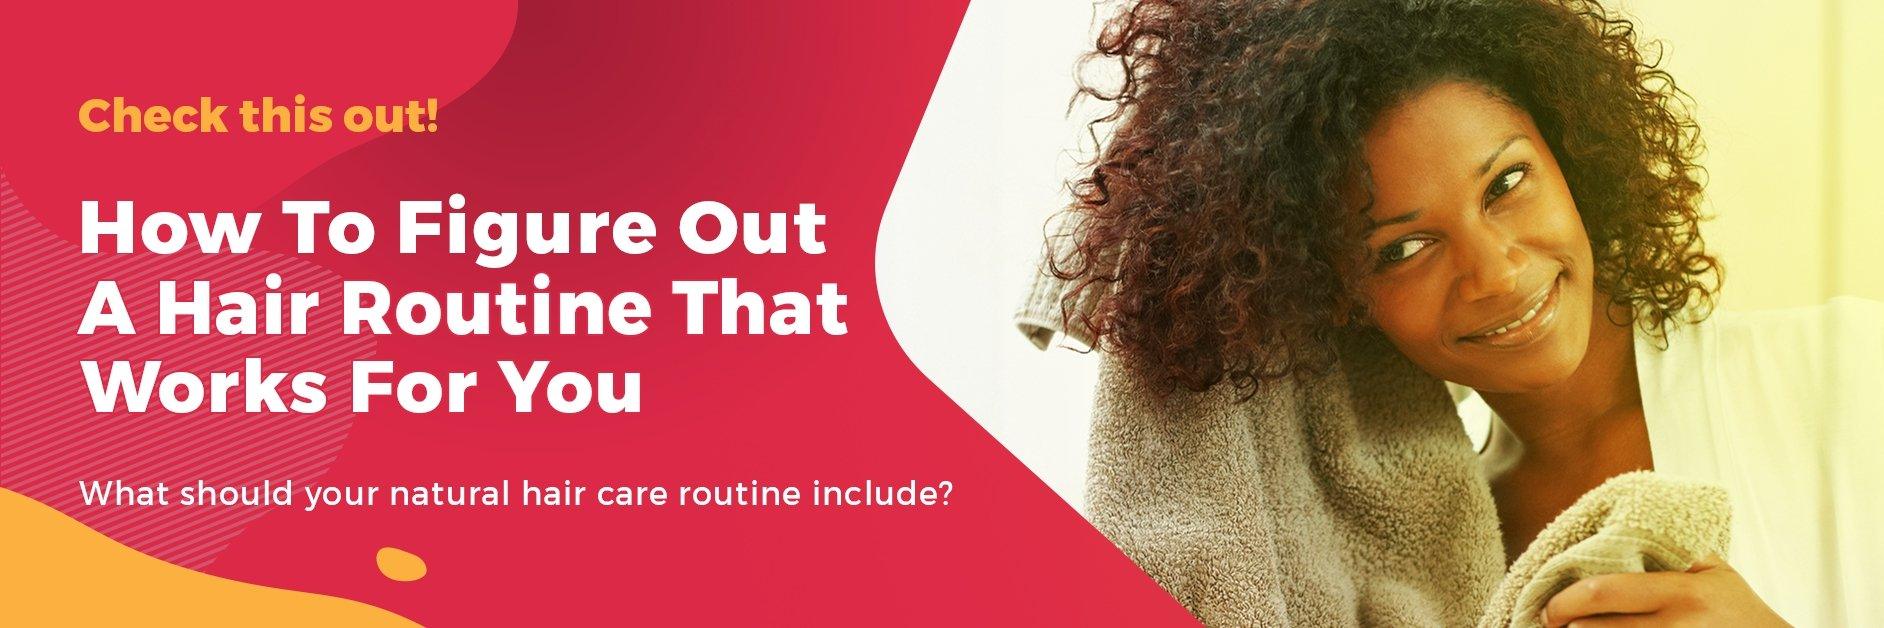 How To Figure Out A Hair Routine That Works For You - GlammedNaturallyOil